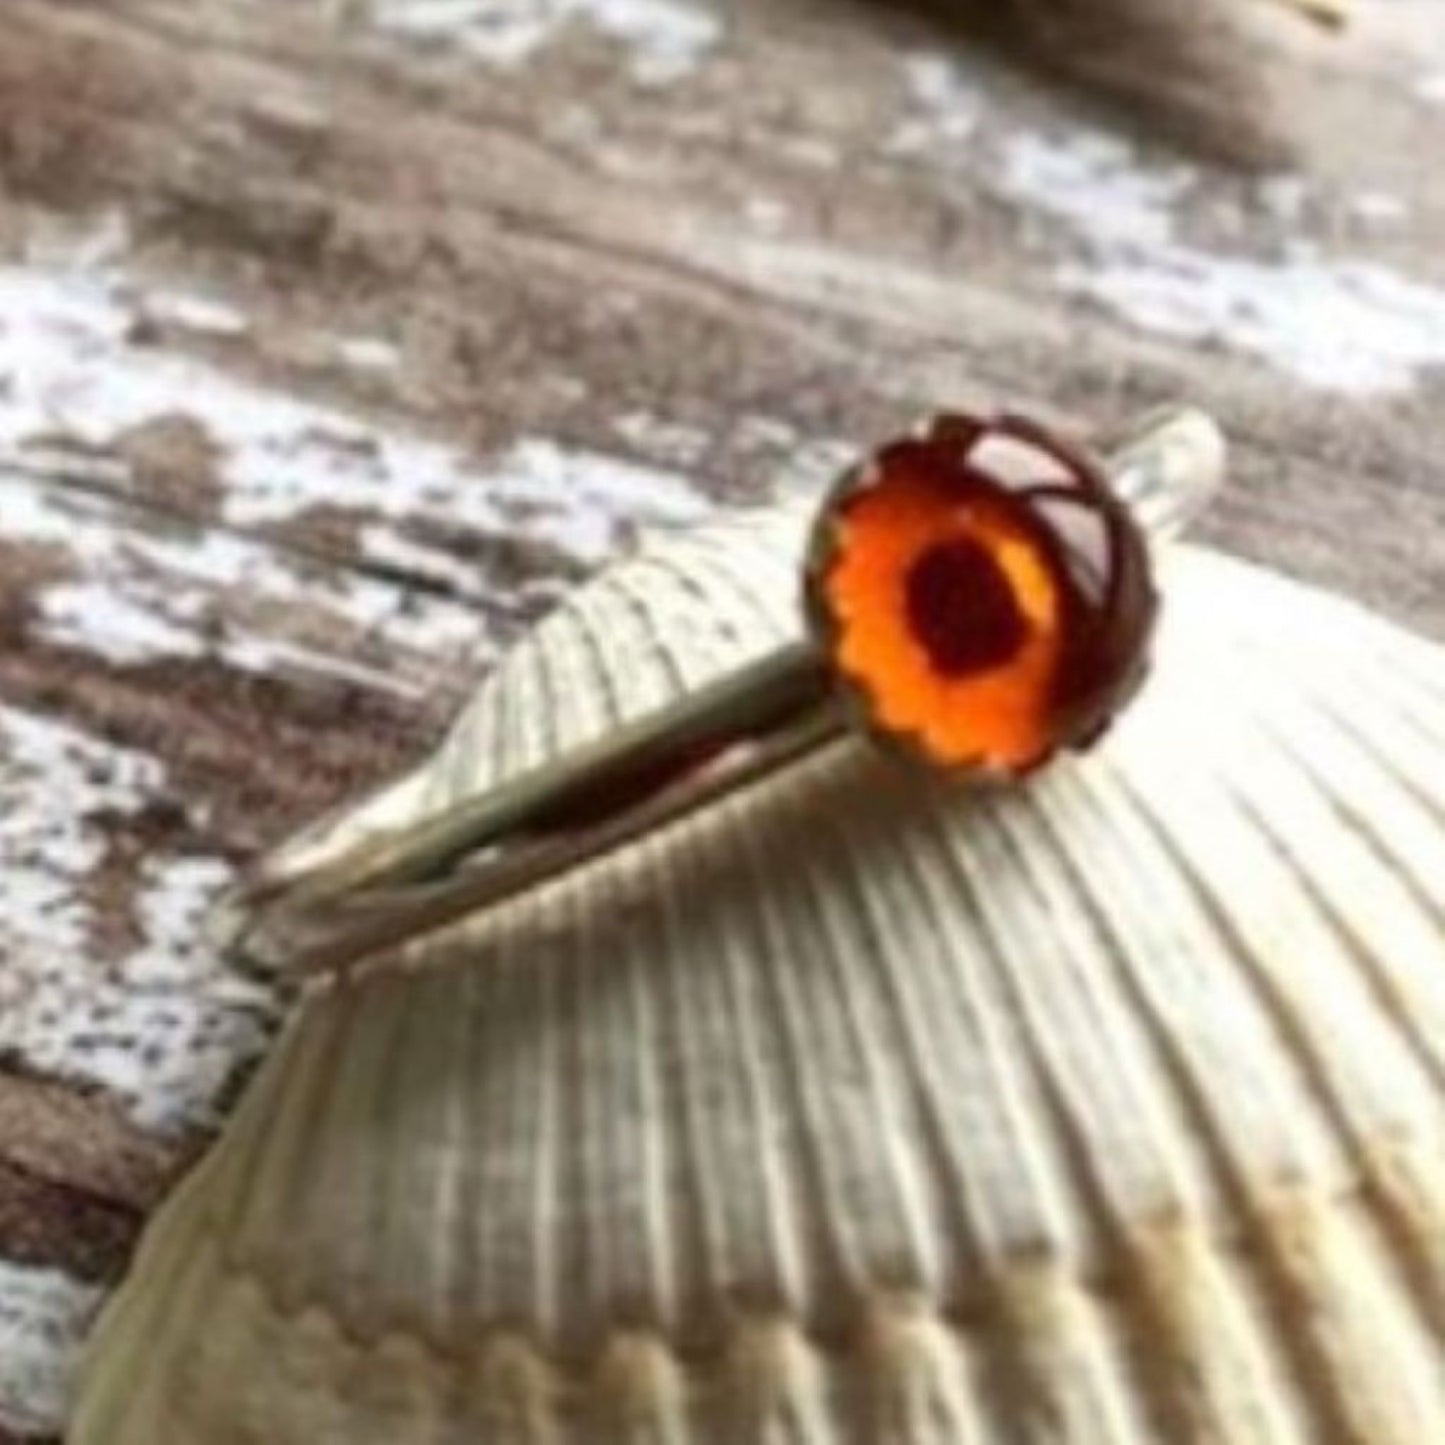 Amber and Sterling Silver Stacking Ring